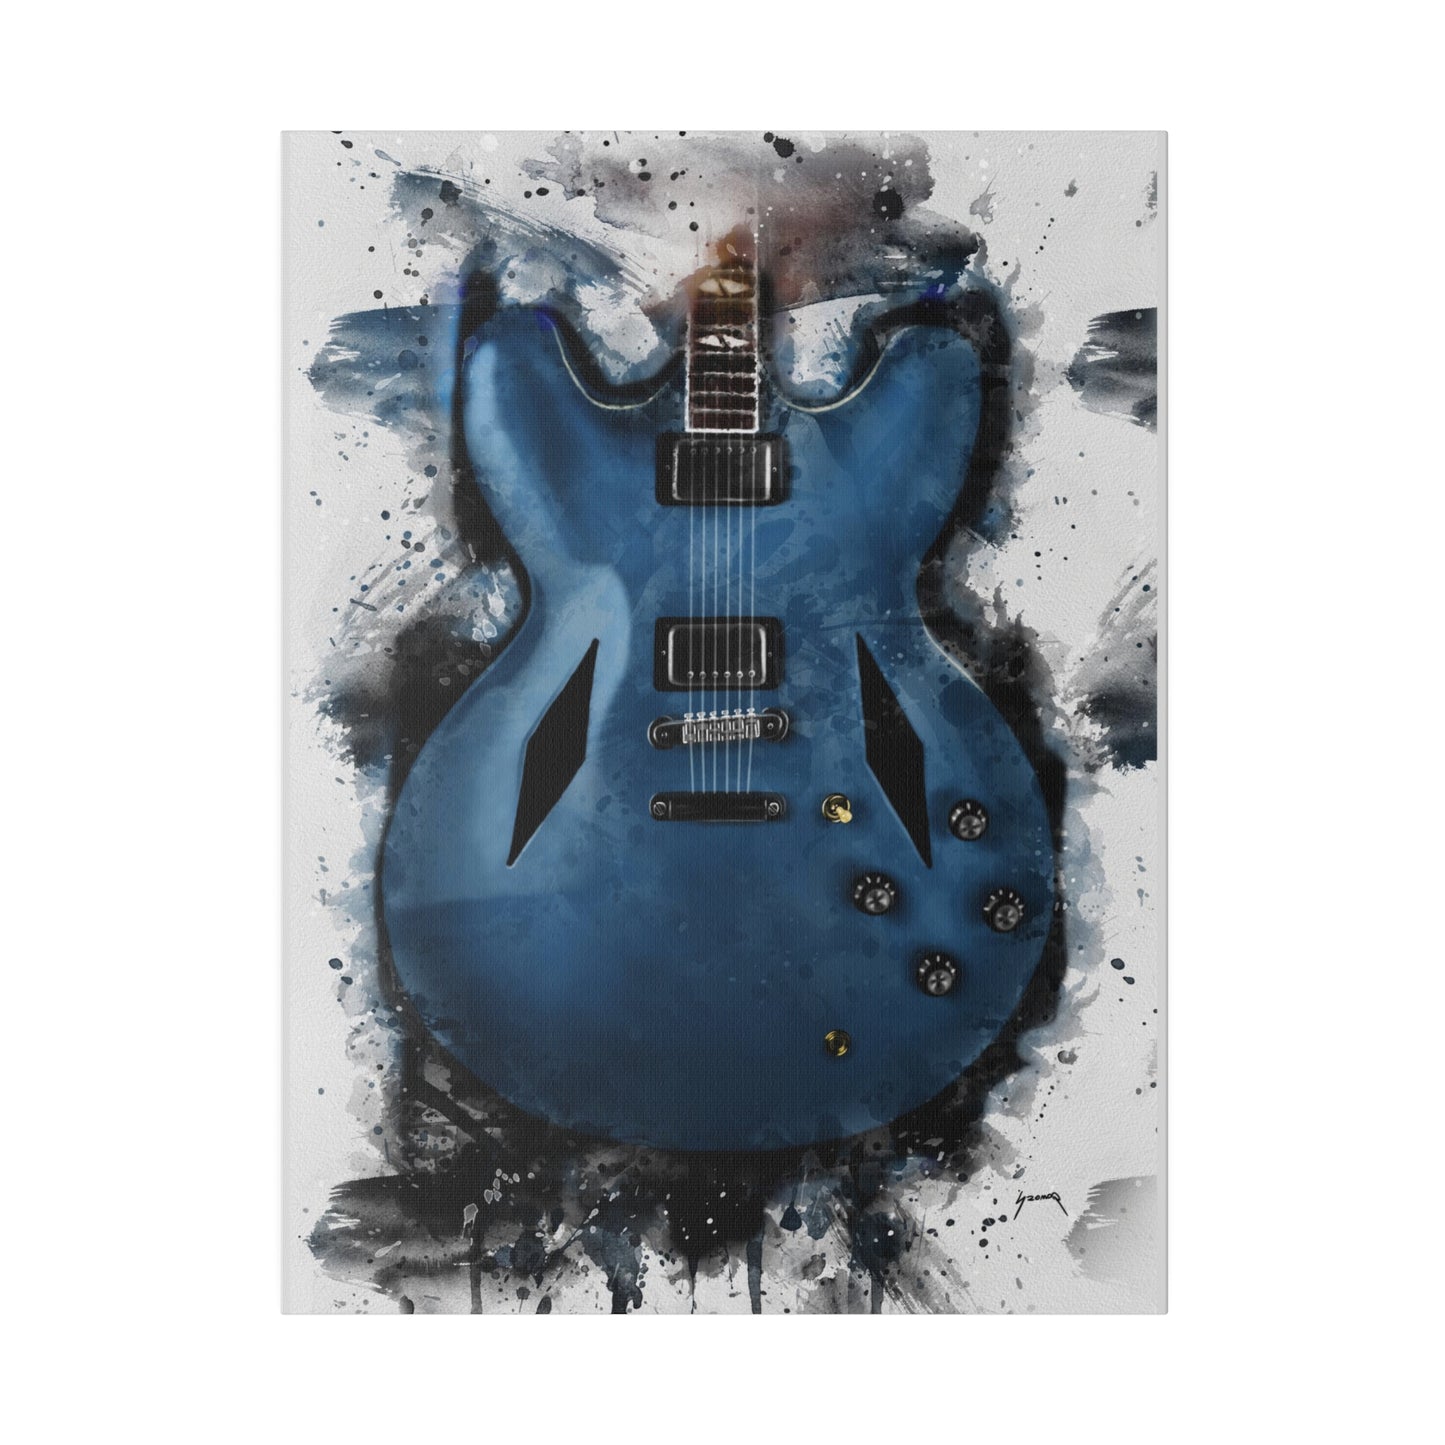 Digital painting of Dave's guitar printed on canvas